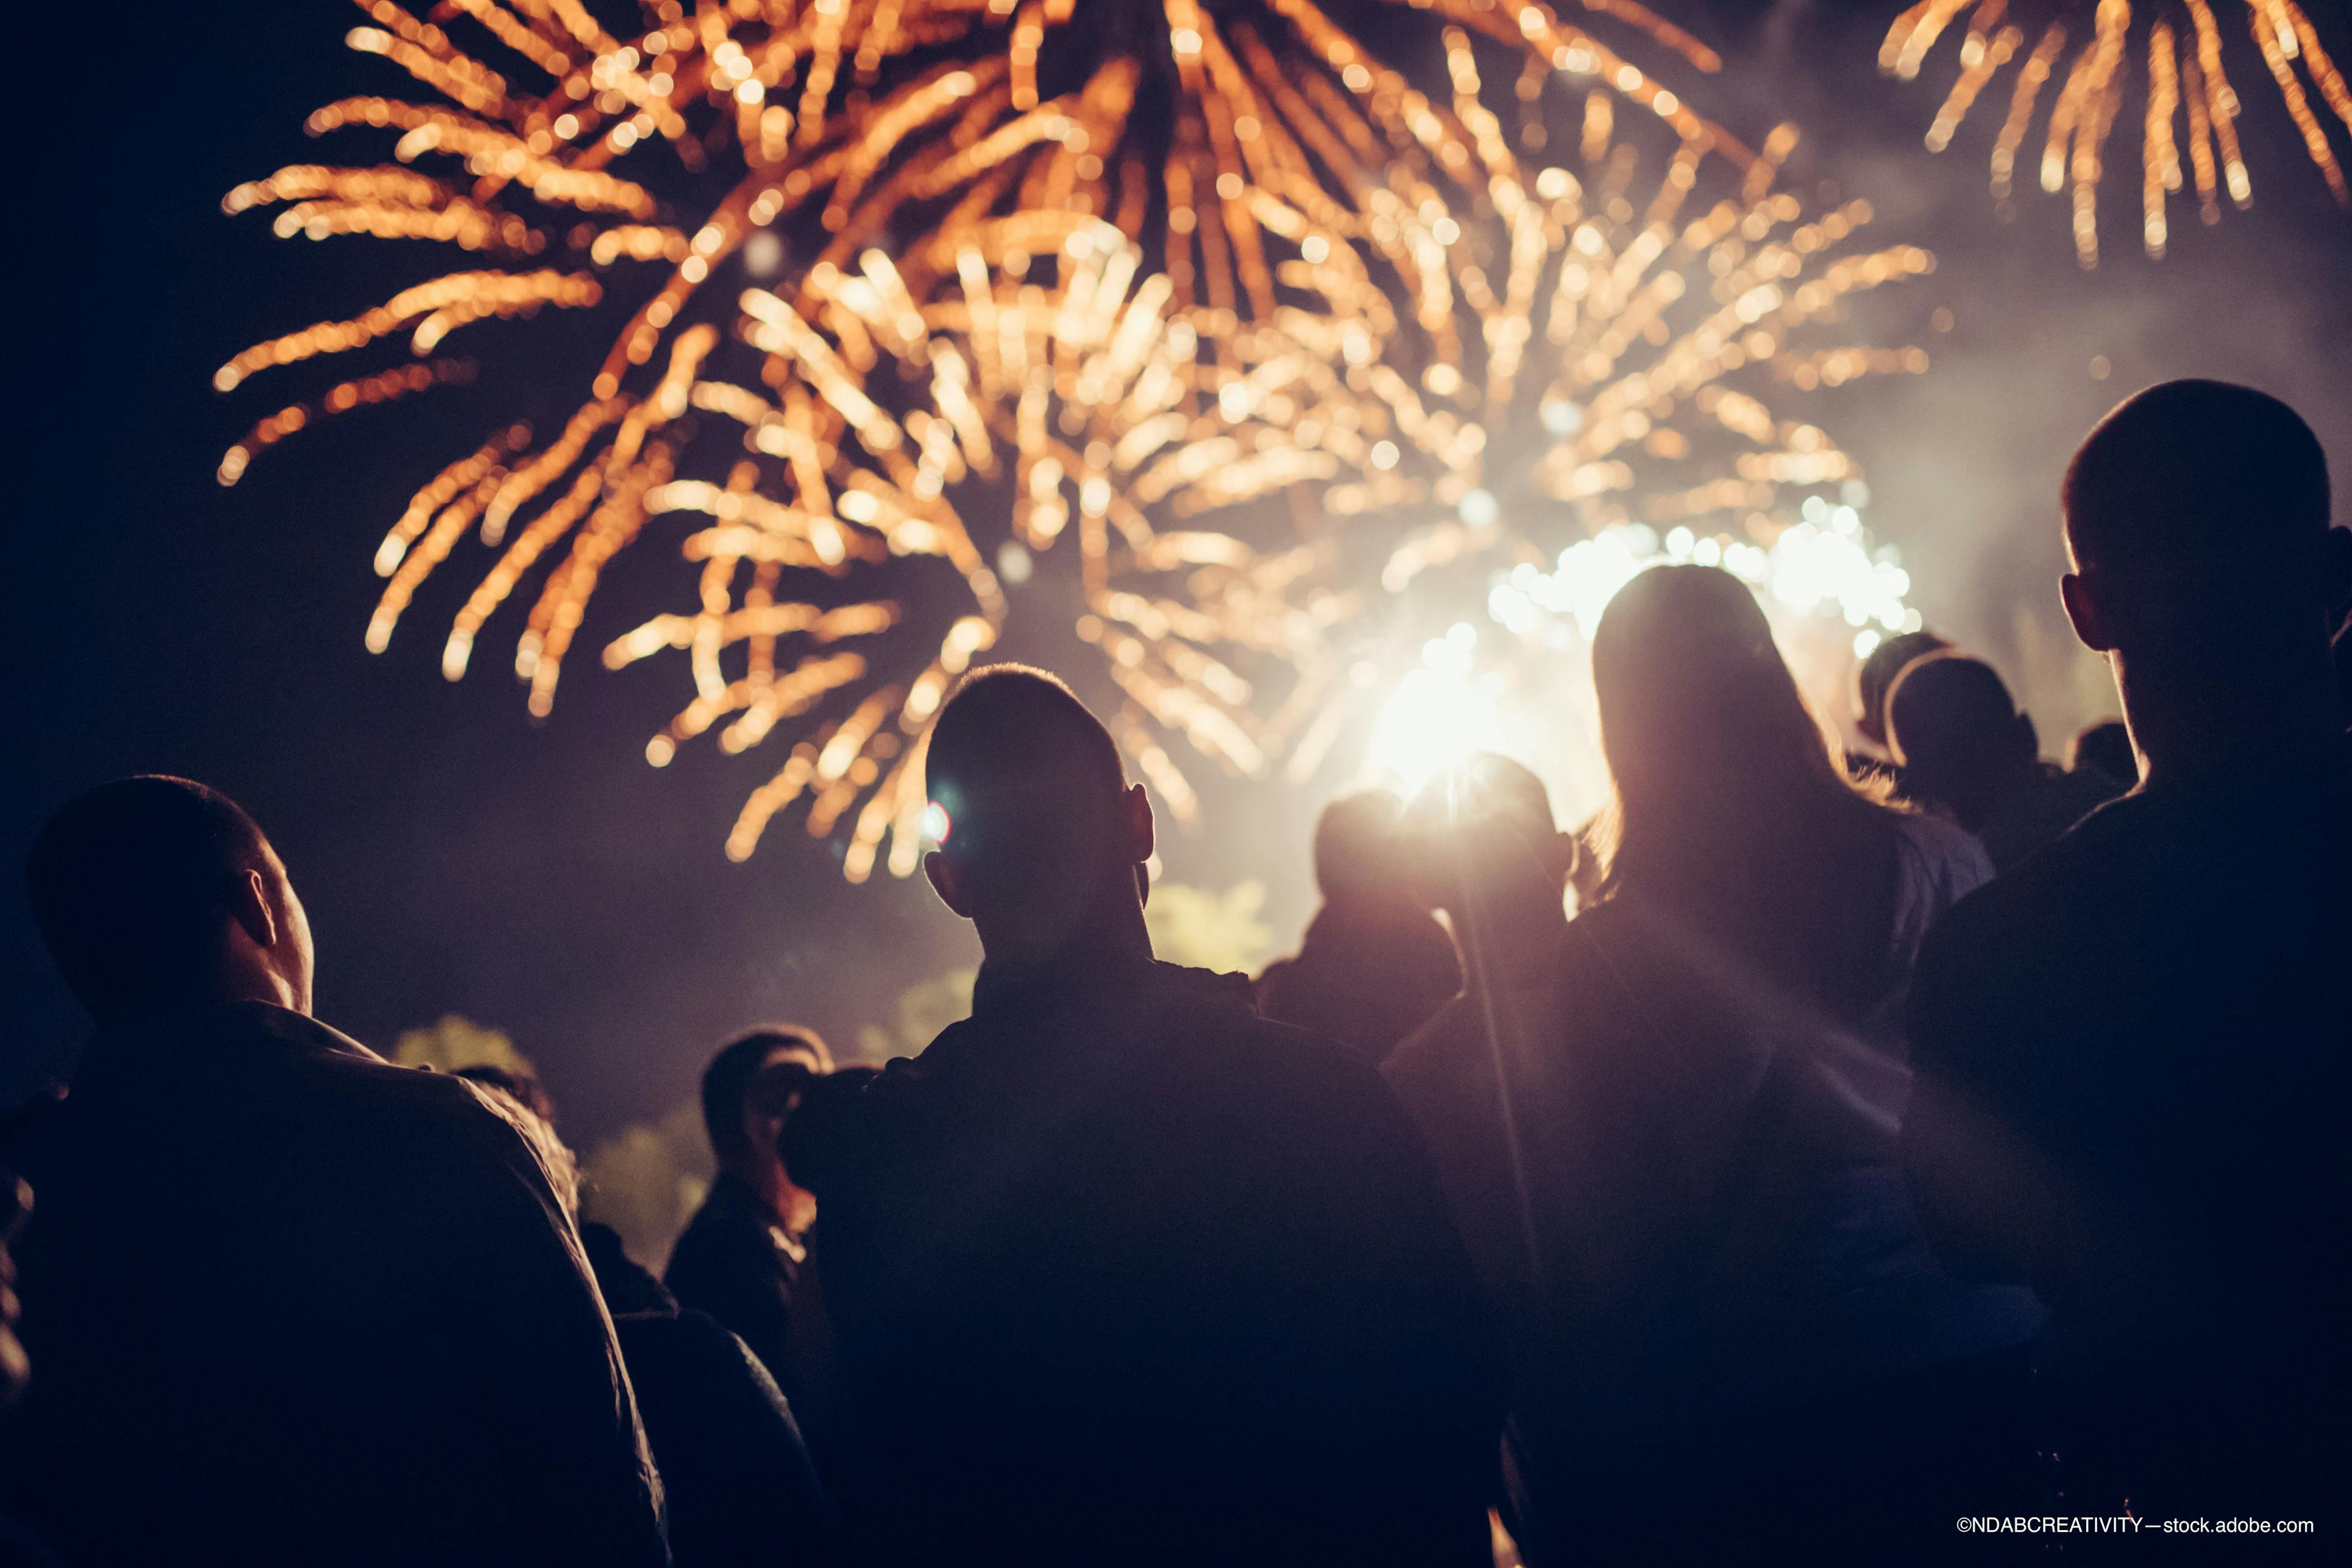 Fireworks and eye injuries: how to stay safe during Independence Day celebrations